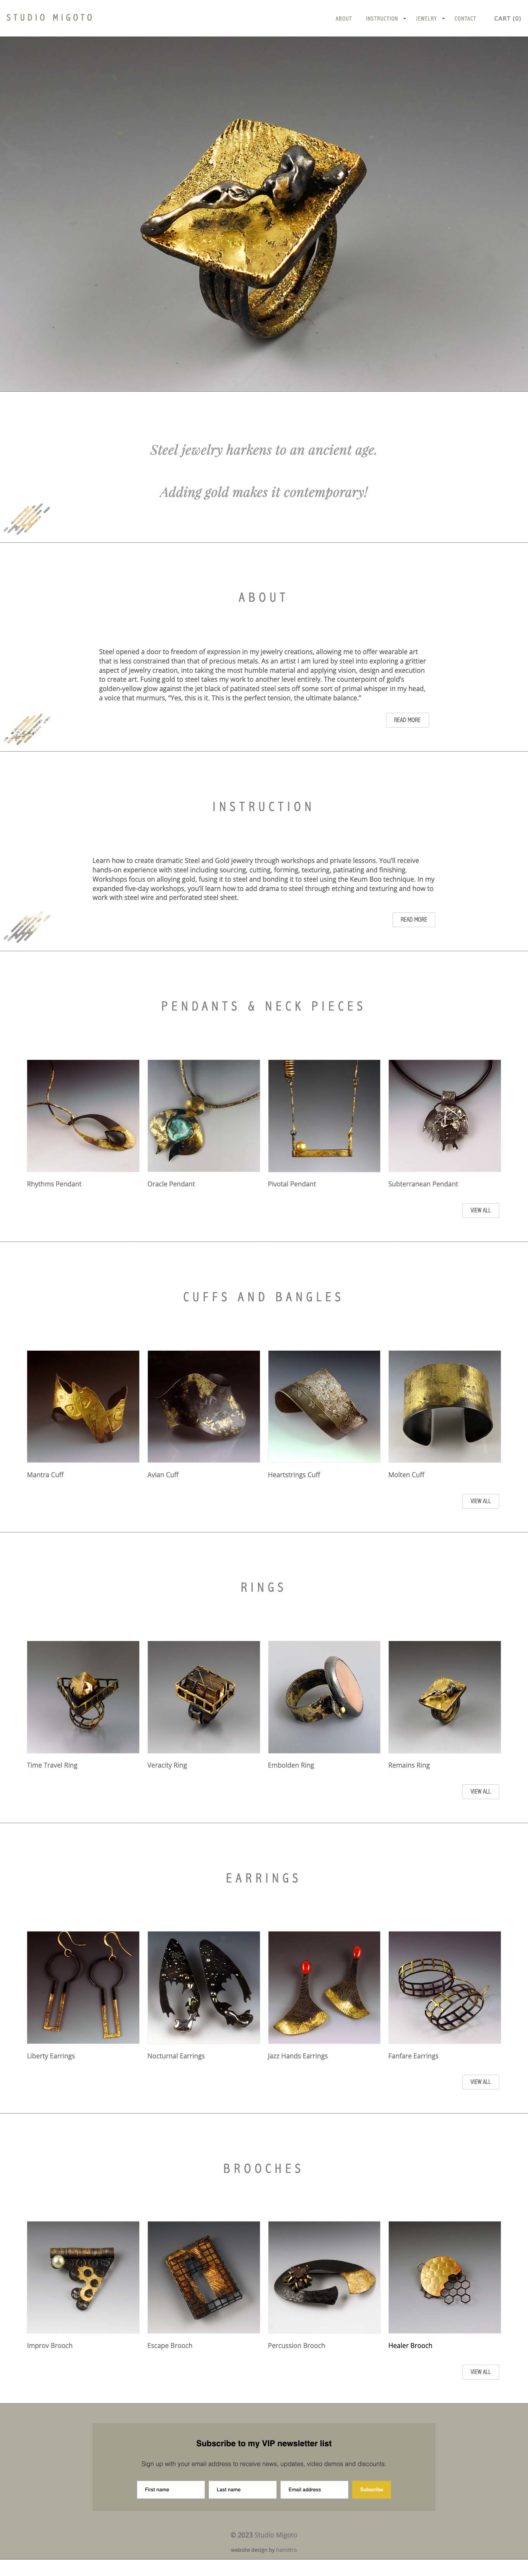 E-commerce website design for a jeweler in California. The long-scrolling homepage features a hero image, a branding statement, a section introducing the jeweler, a section introducing classes offered, five sections with four thumbnails each for each of the five categories of jewelry, and a newsletter sign-up form in the footer.